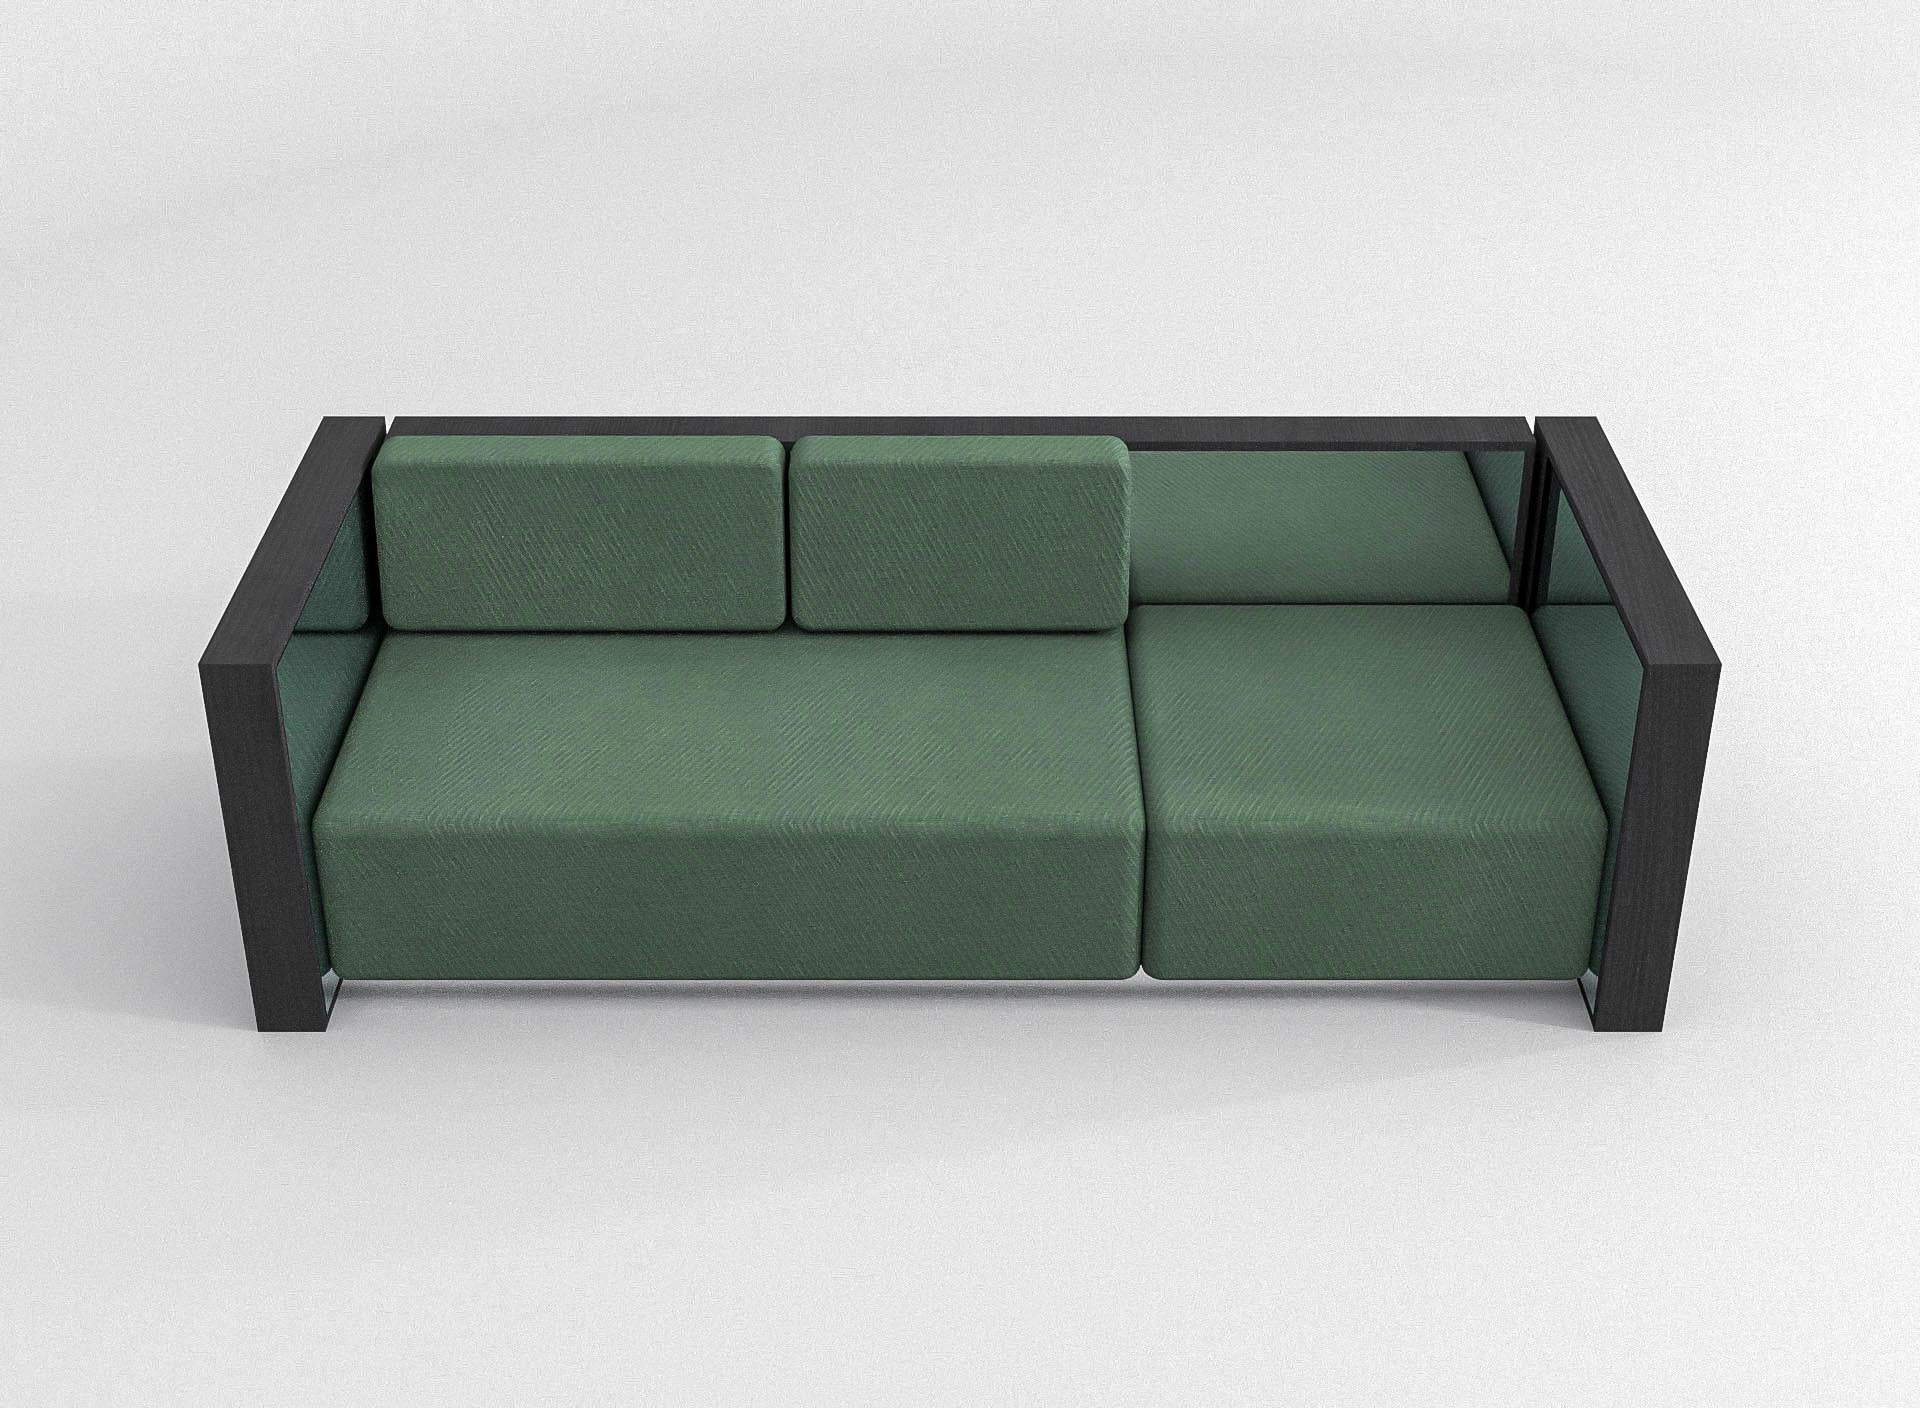 Art Deco Barh Sofa in Black Ash Wood, Polished Stainless Steel and Green Upholstery For Sale